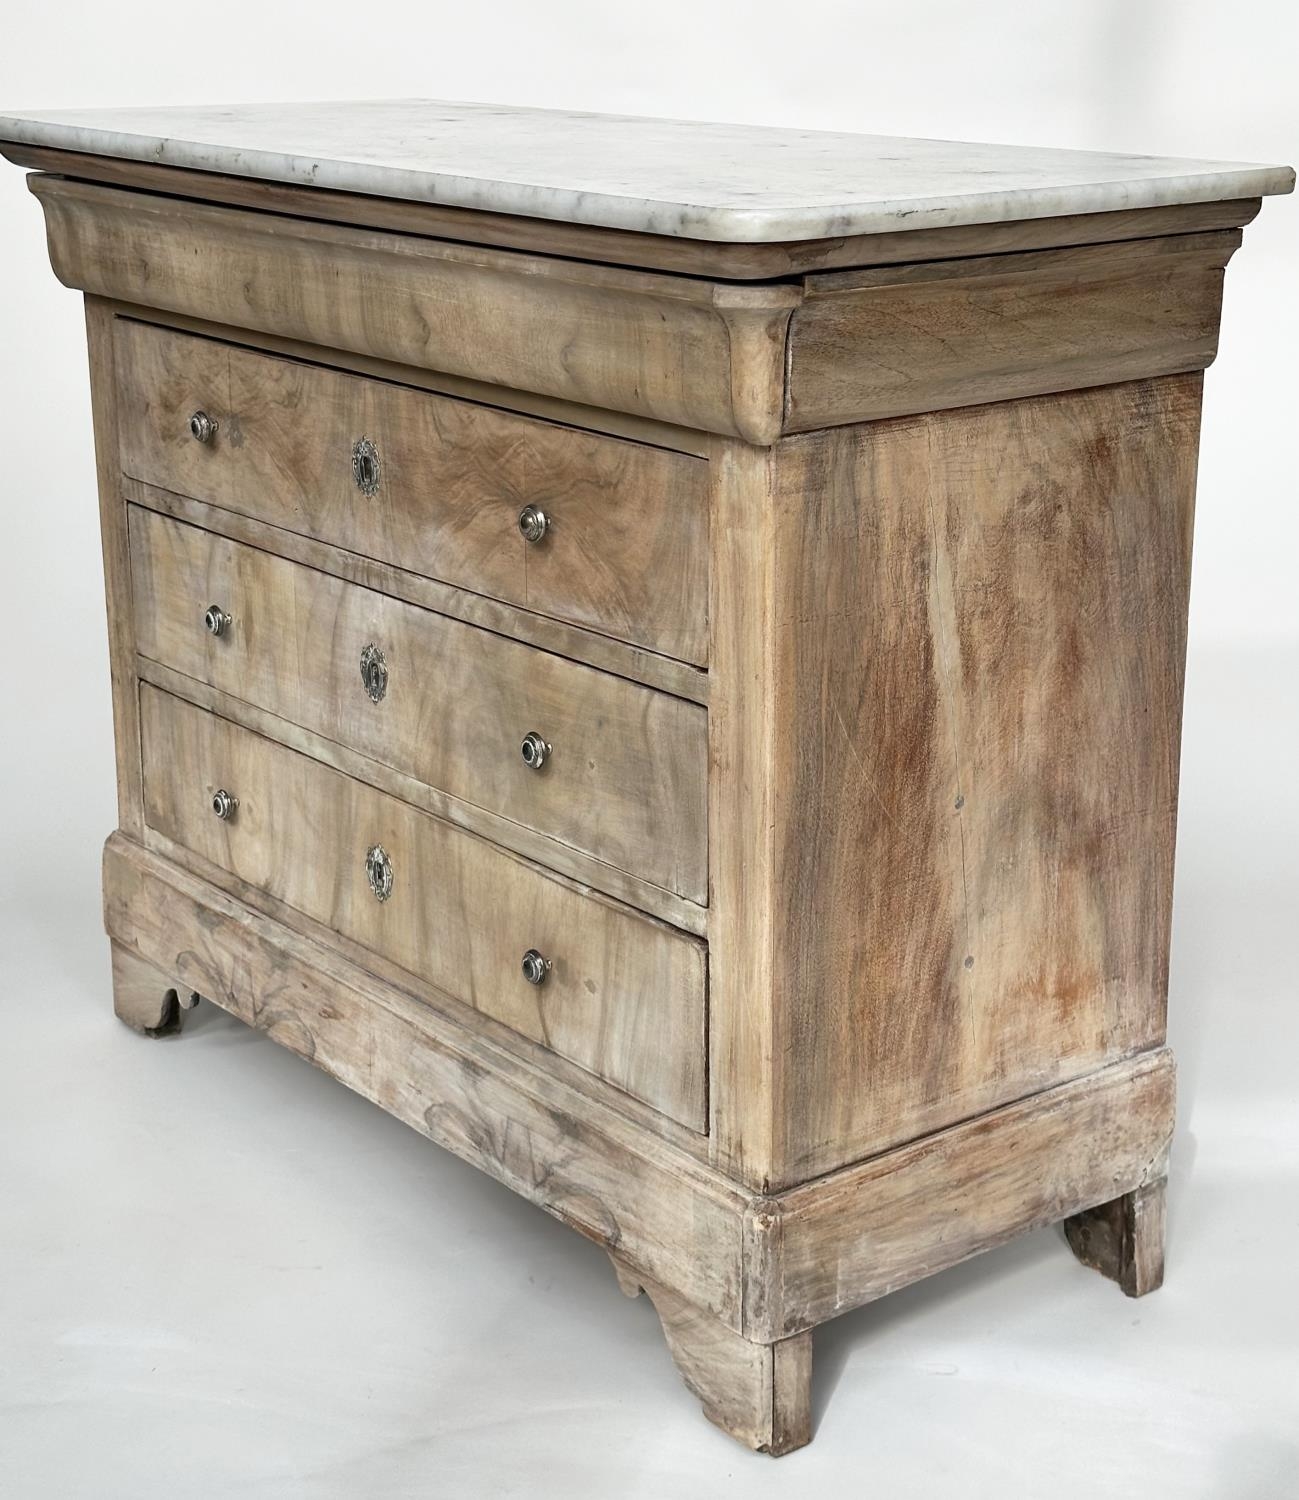 COMMODE, 19th century French Louis Philippe figured walnut with four long drawers silvered metal - Image 11 of 12